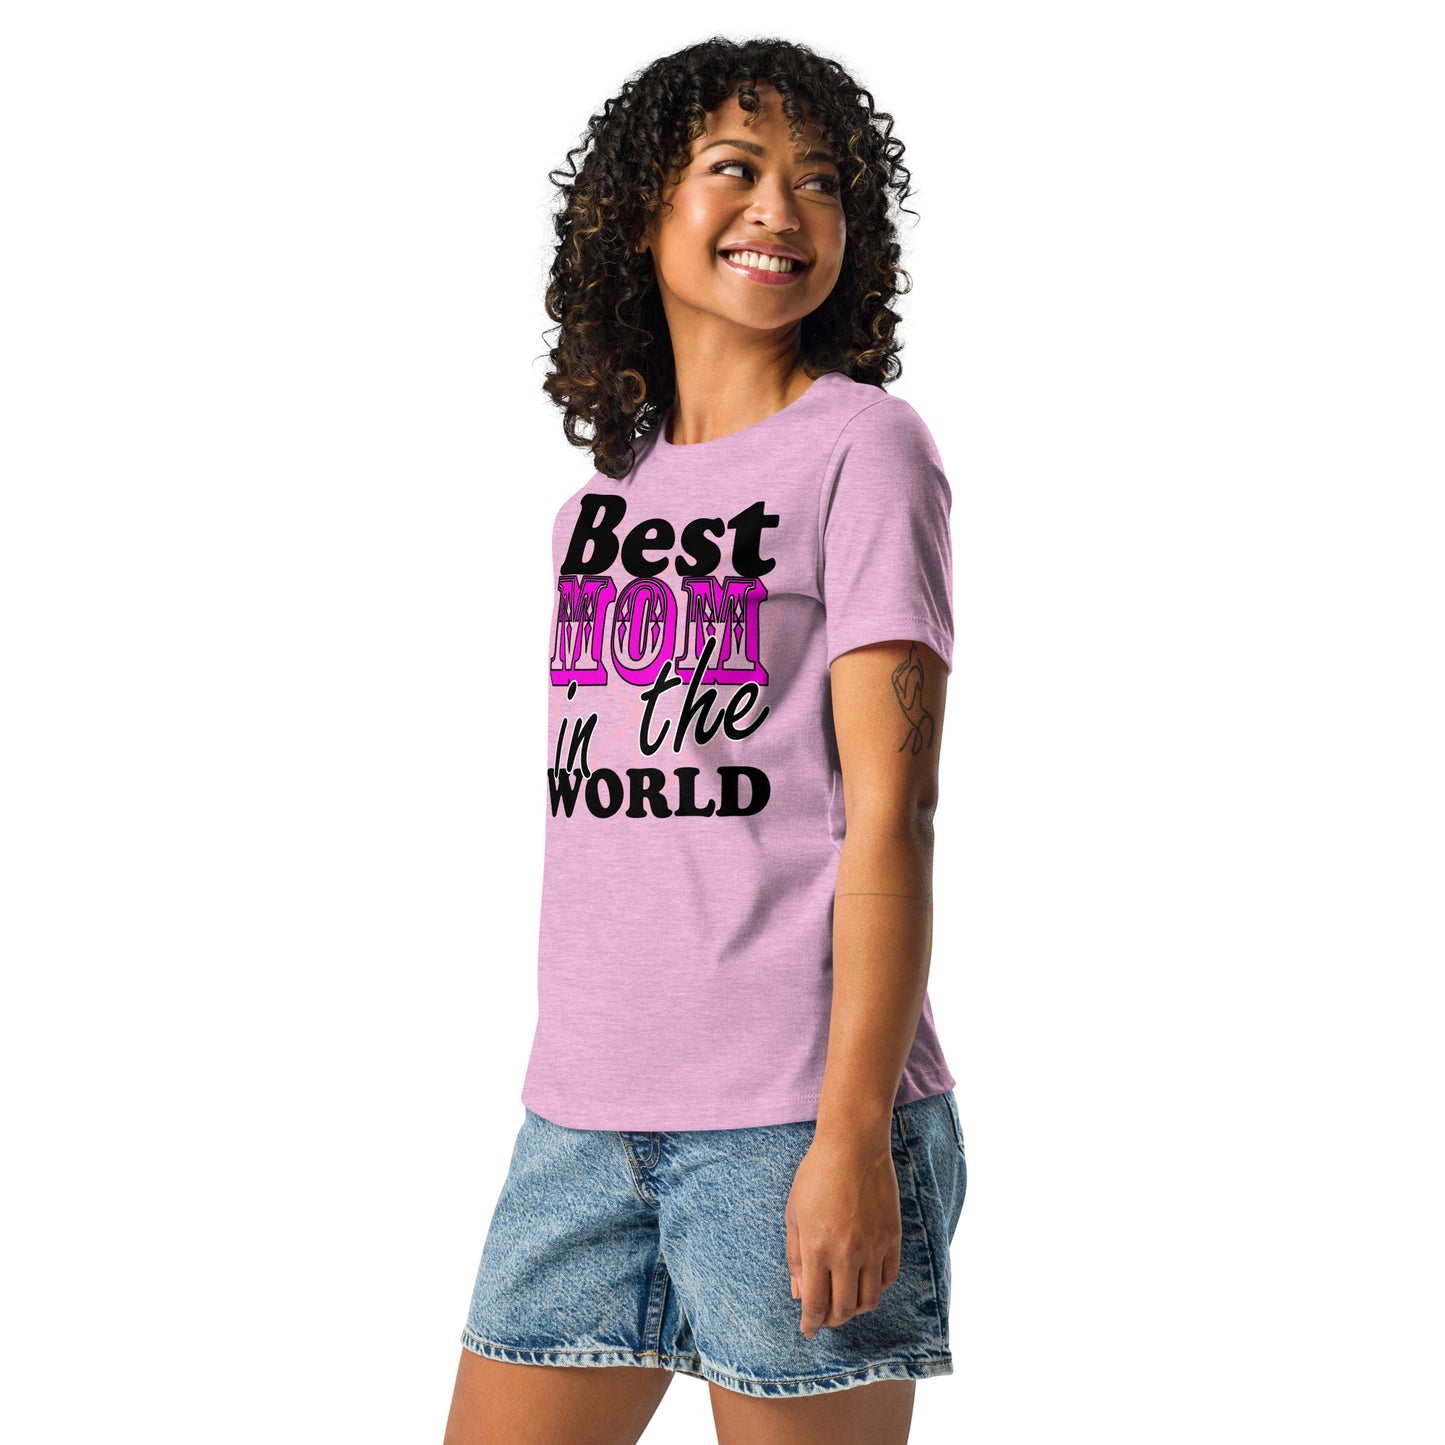 Women with T-shirt Heather Prism lilac color with the text "Best MOM in the world"